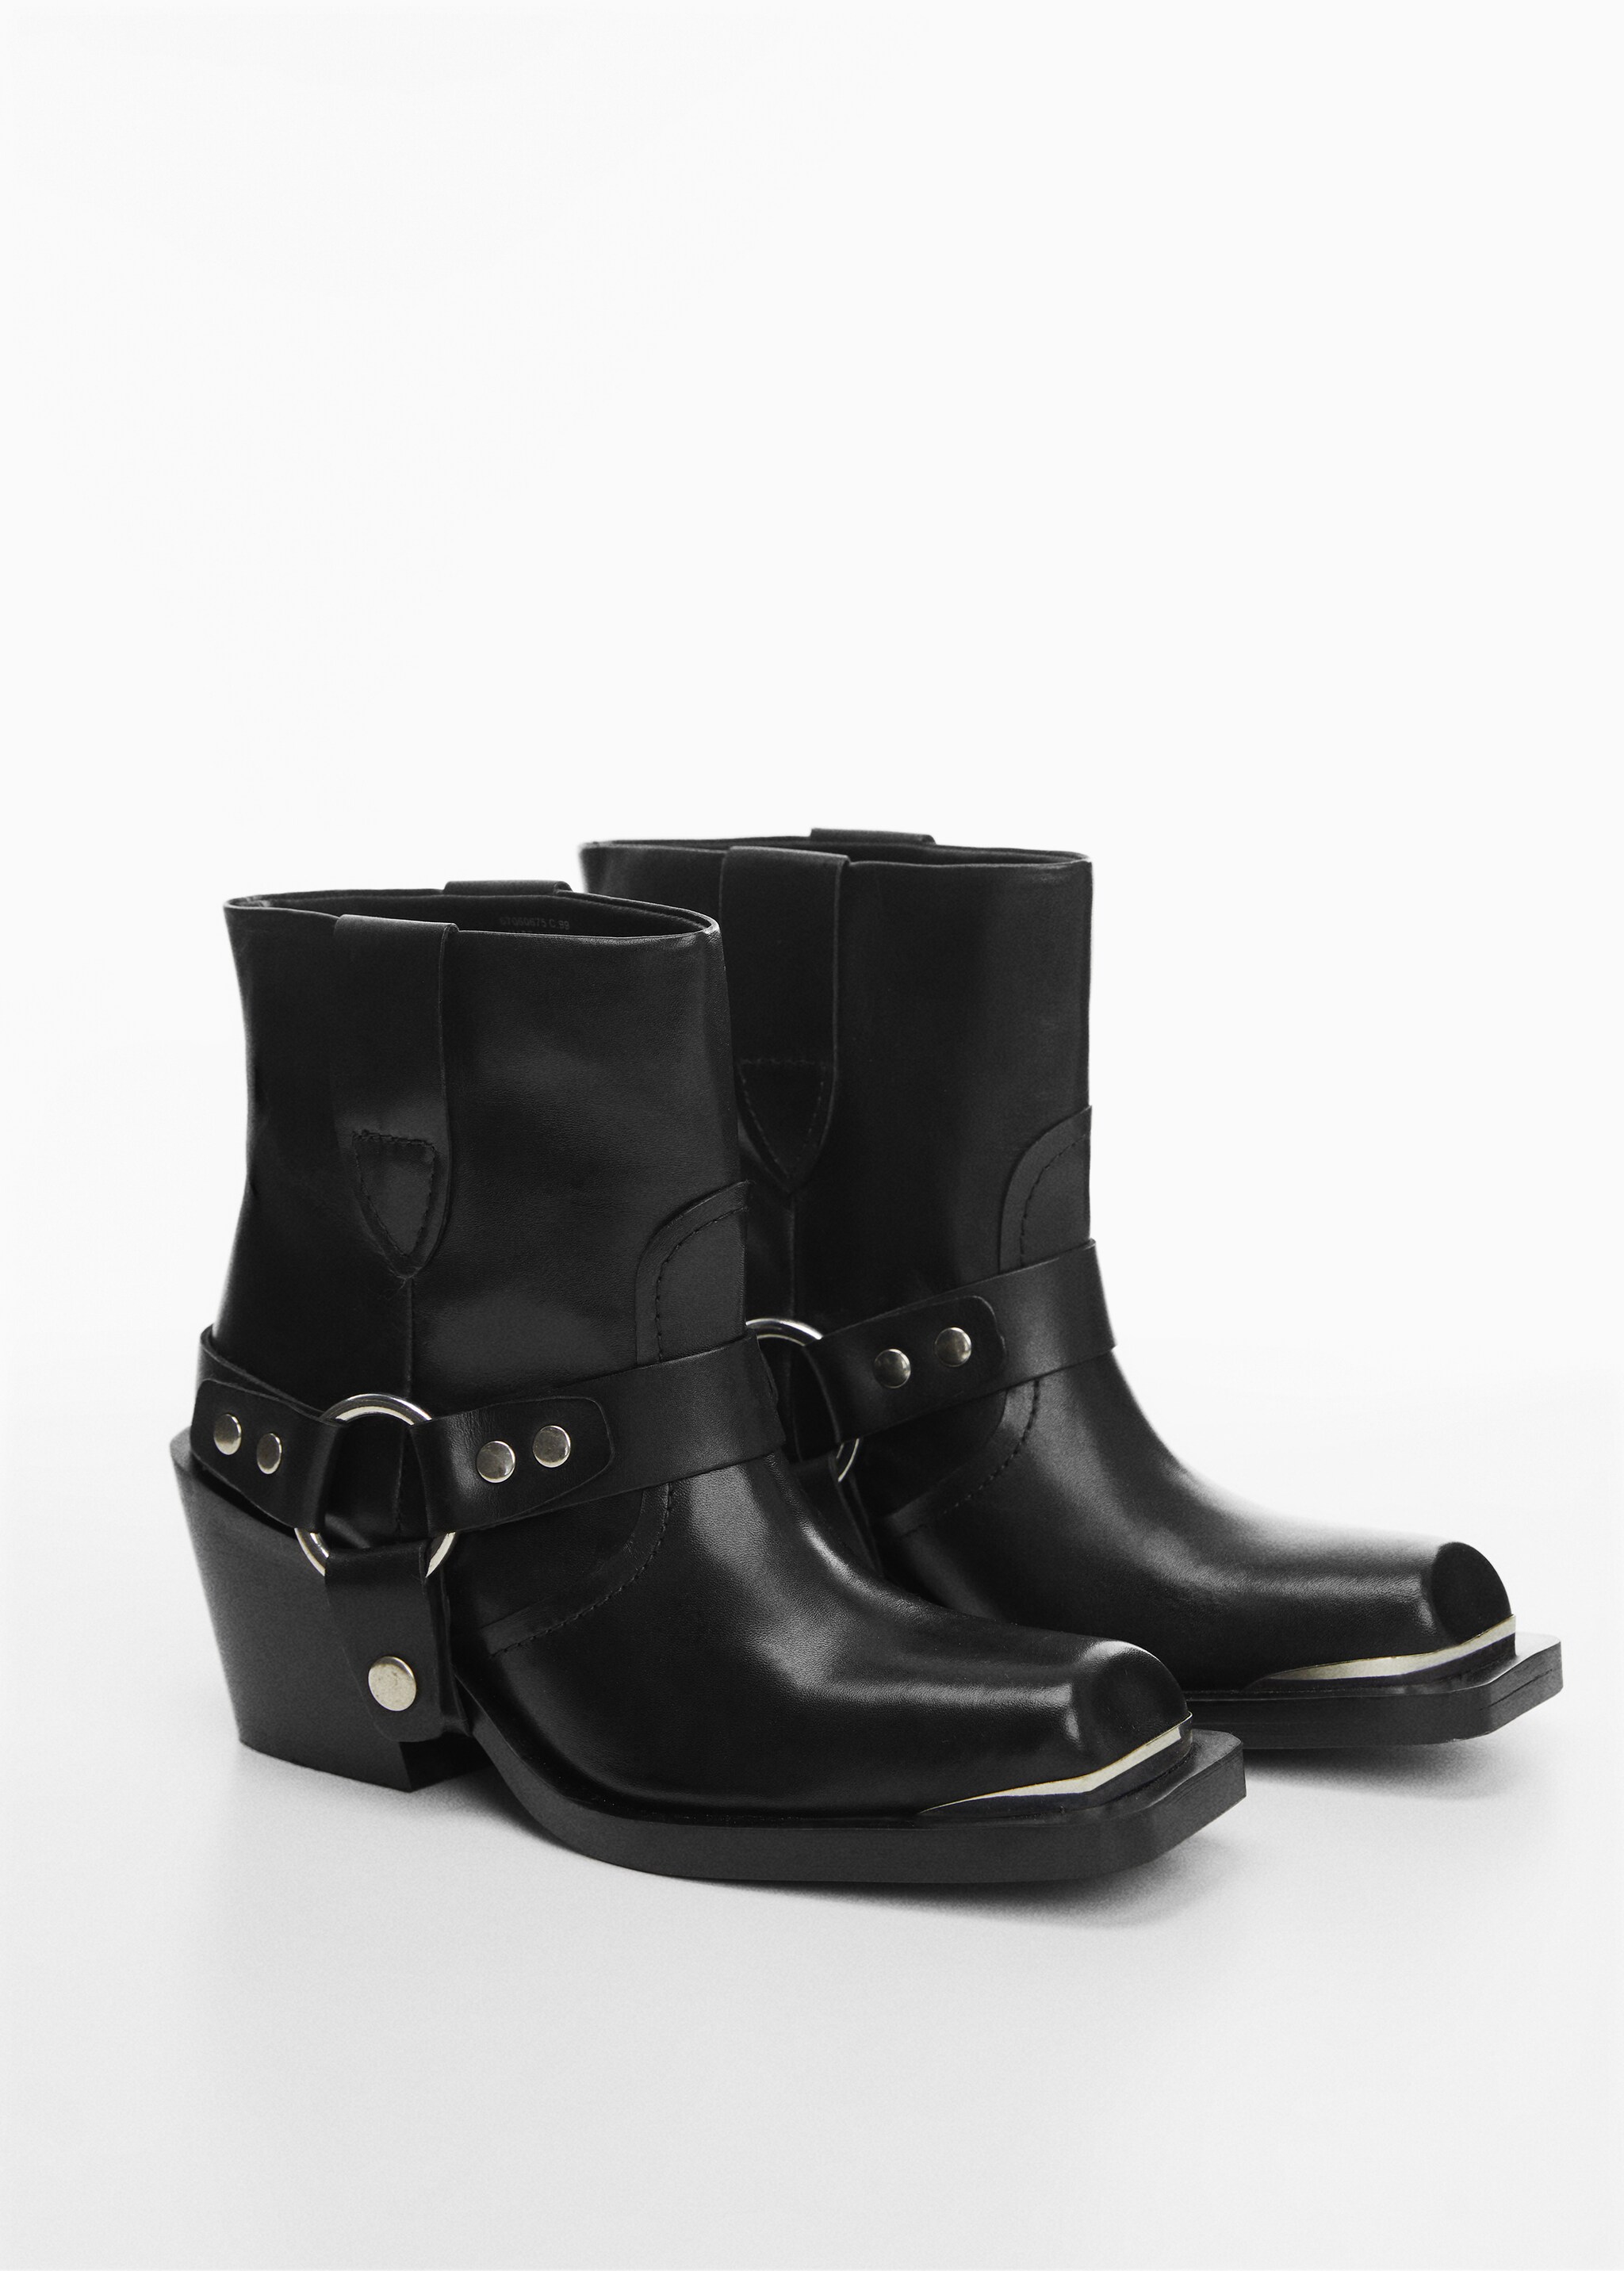 Buckle ankle boots - Medium plane